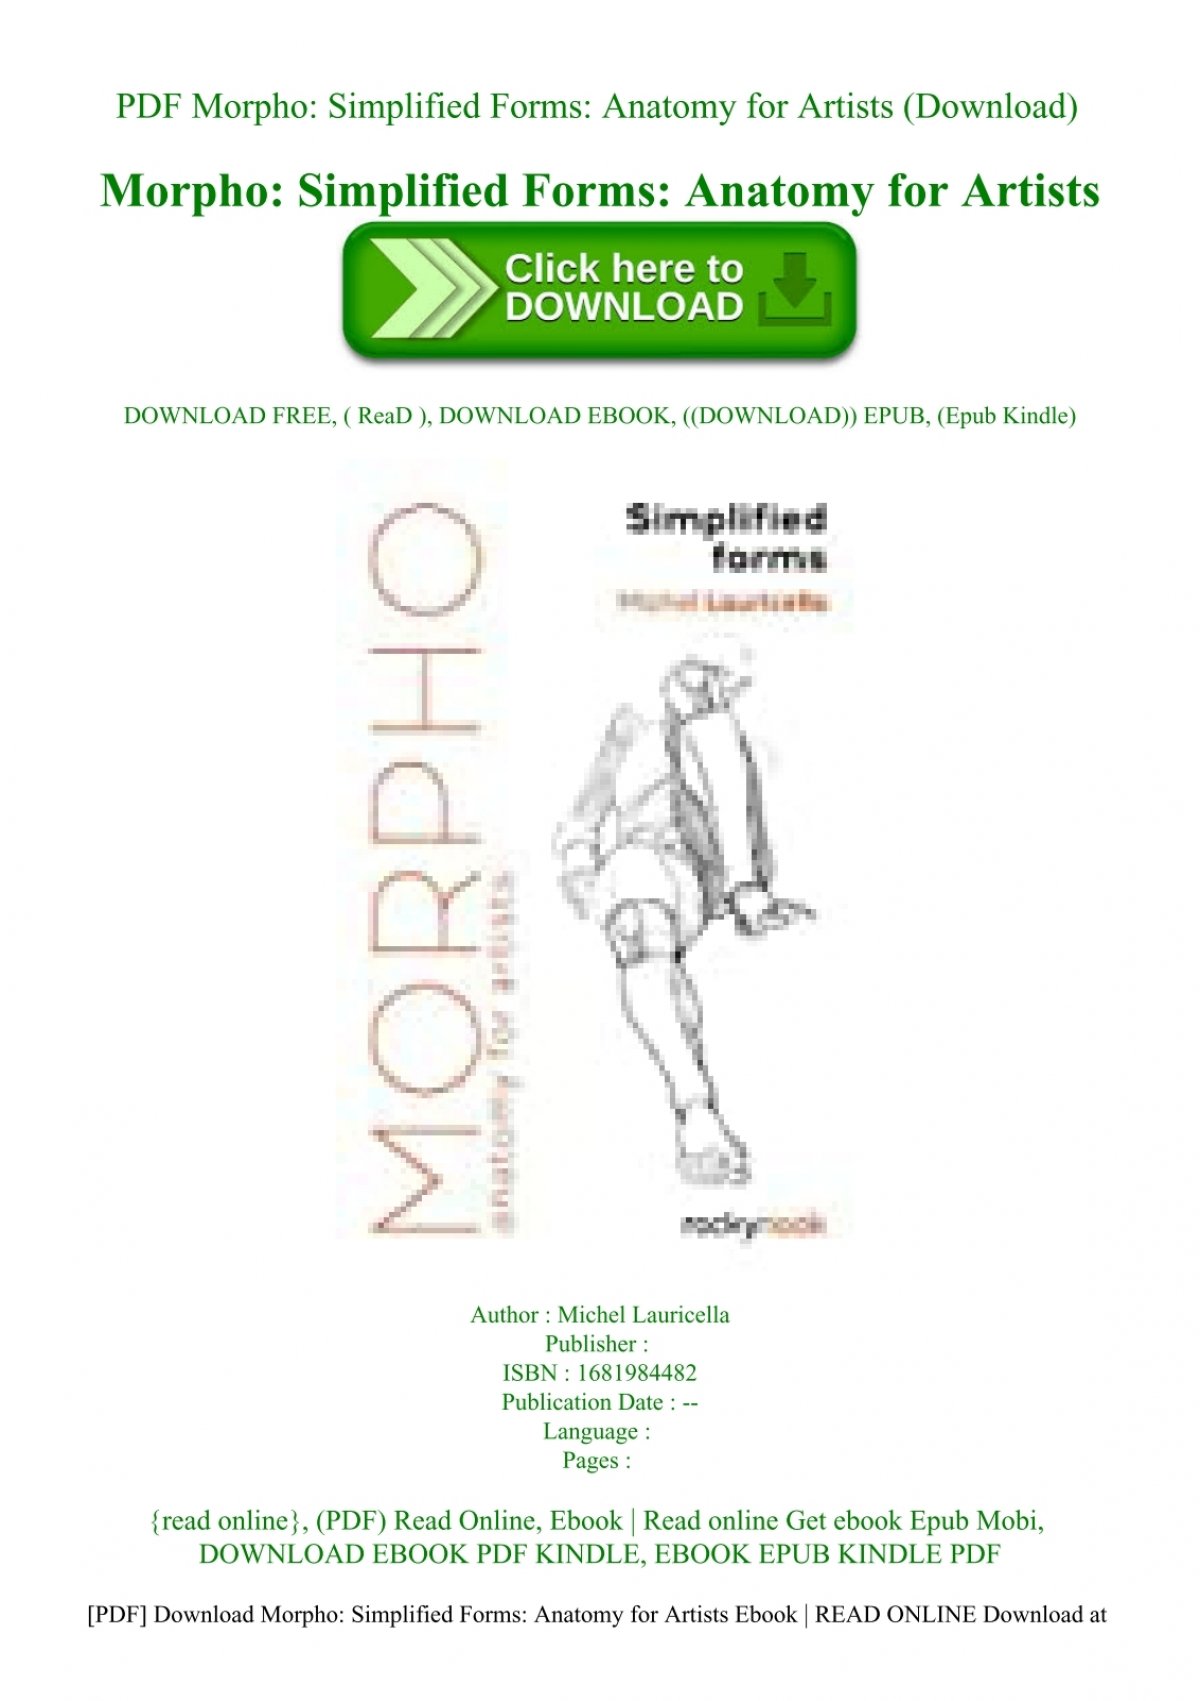 read-pdf-morpho-simplified-forms-anatomy-for-artists-download